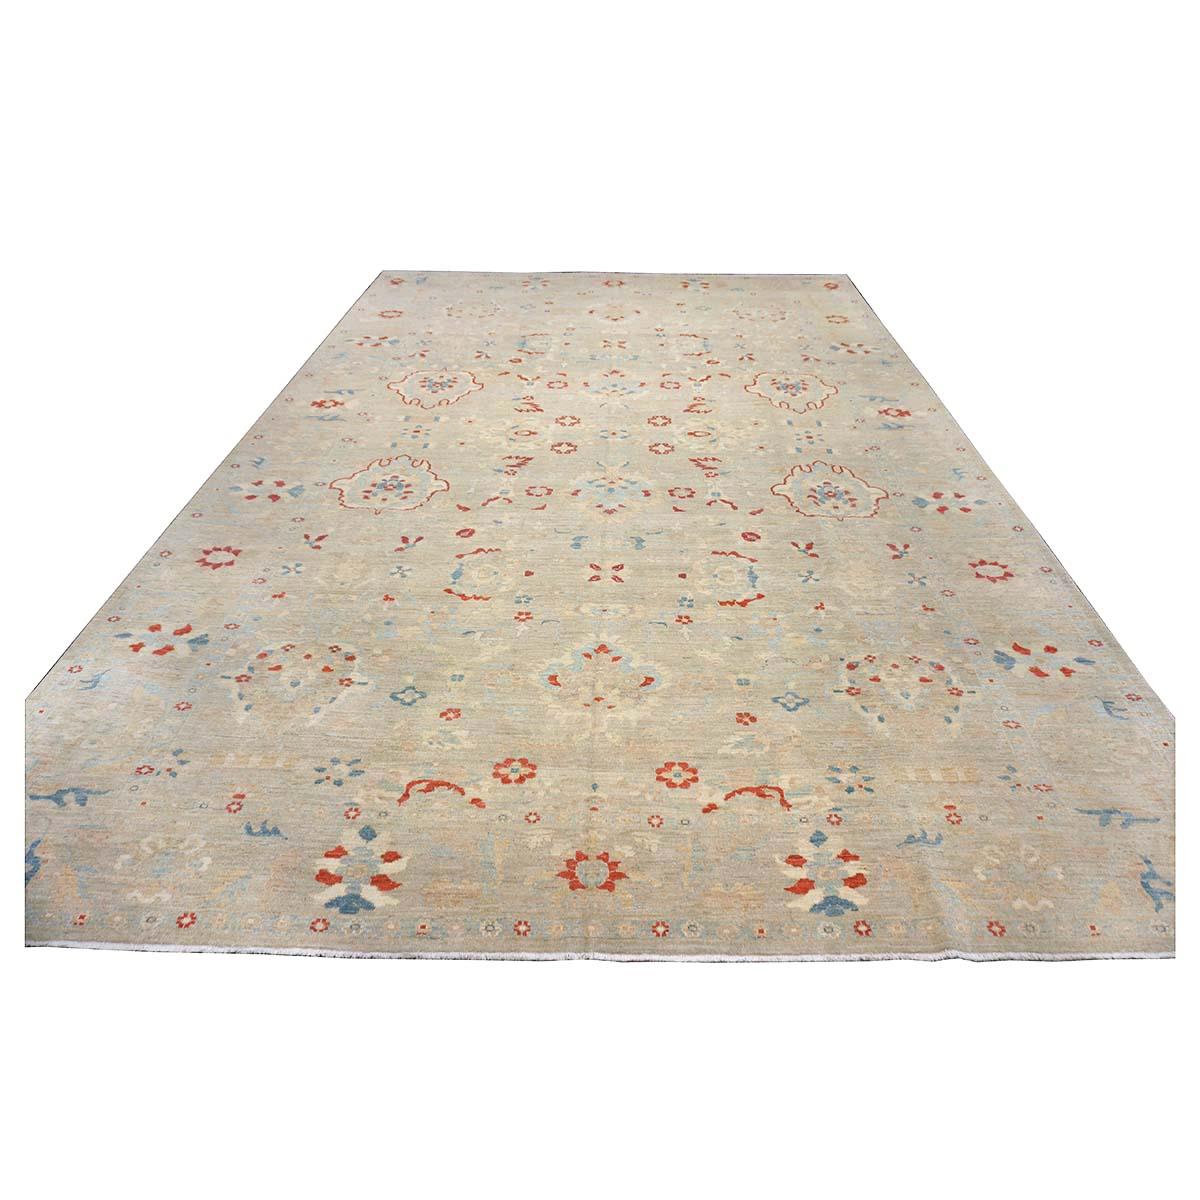 Wool 21st Century Sultanabad Master 12x17 Ivory, Red, & Blue Handmade Area Rug For Sale